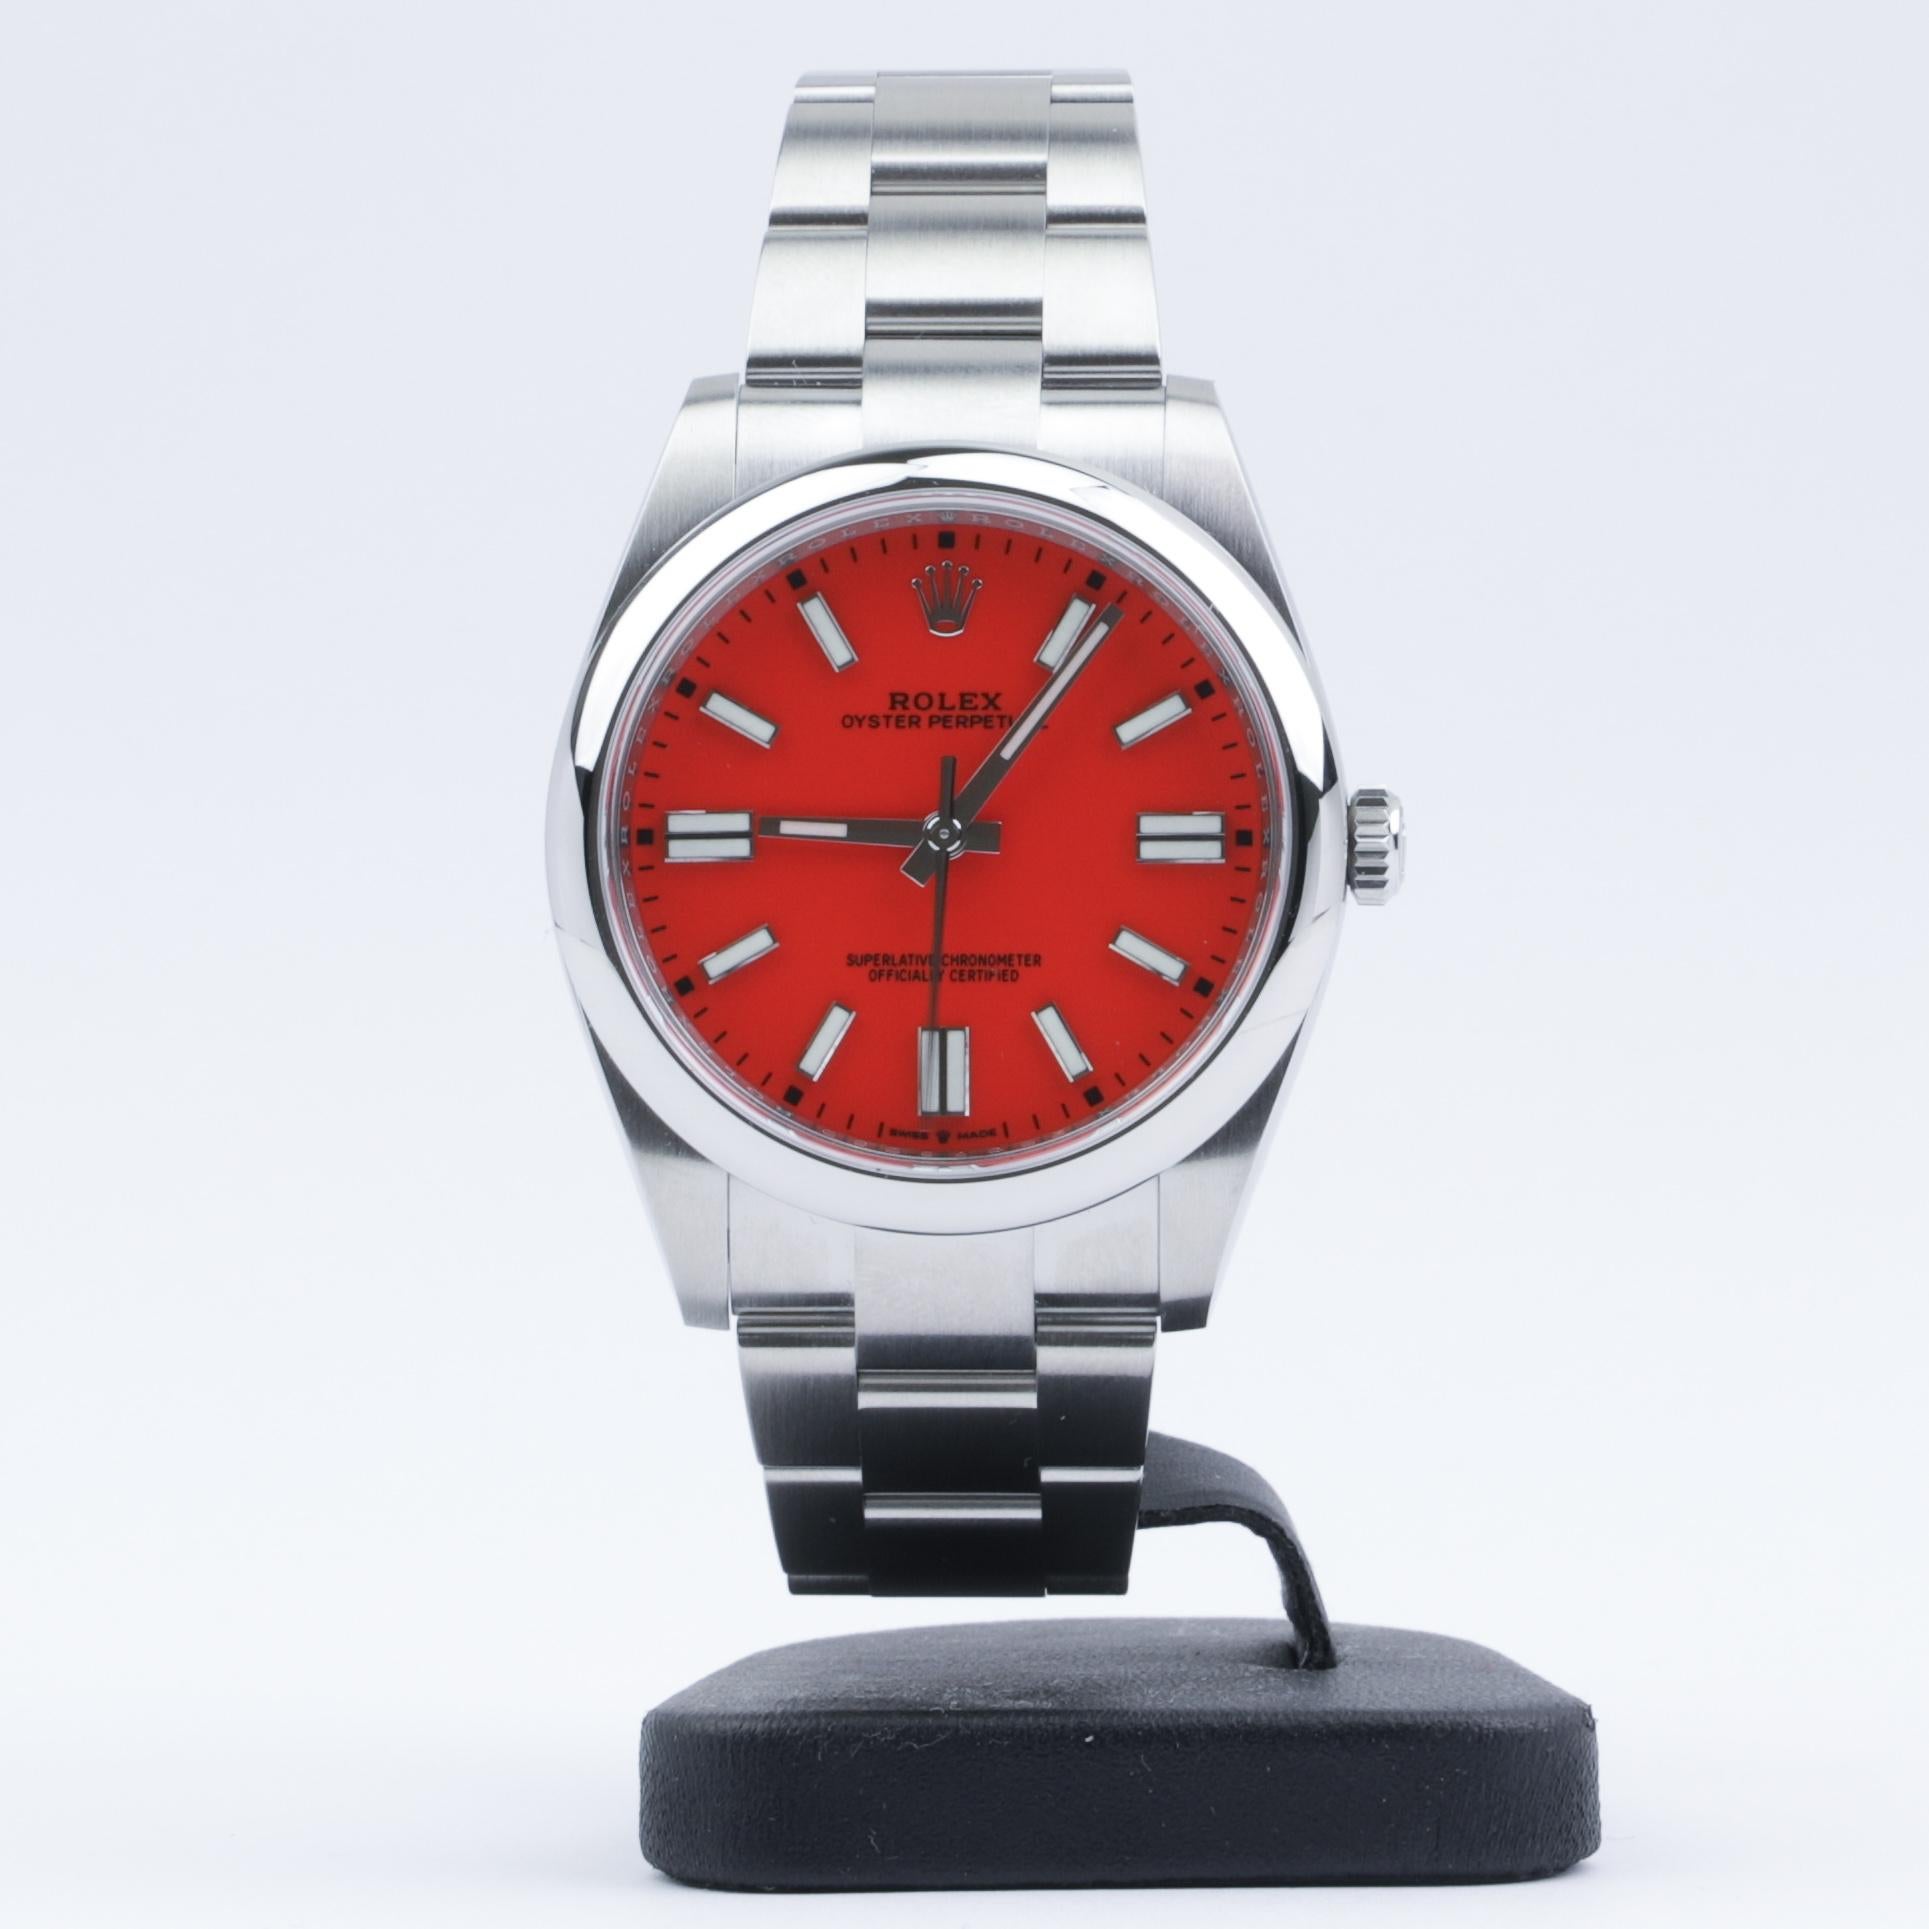 This Rolex Oyster Perpetual 41mm Coral Red Dial 124300 2021 is in overall good pre-owned condition. 

Comes with new card.

Rolex Oyster Perpetual 41 reference 124300 with “Coral Red” dial. This watch is 2021 model which features the new generation